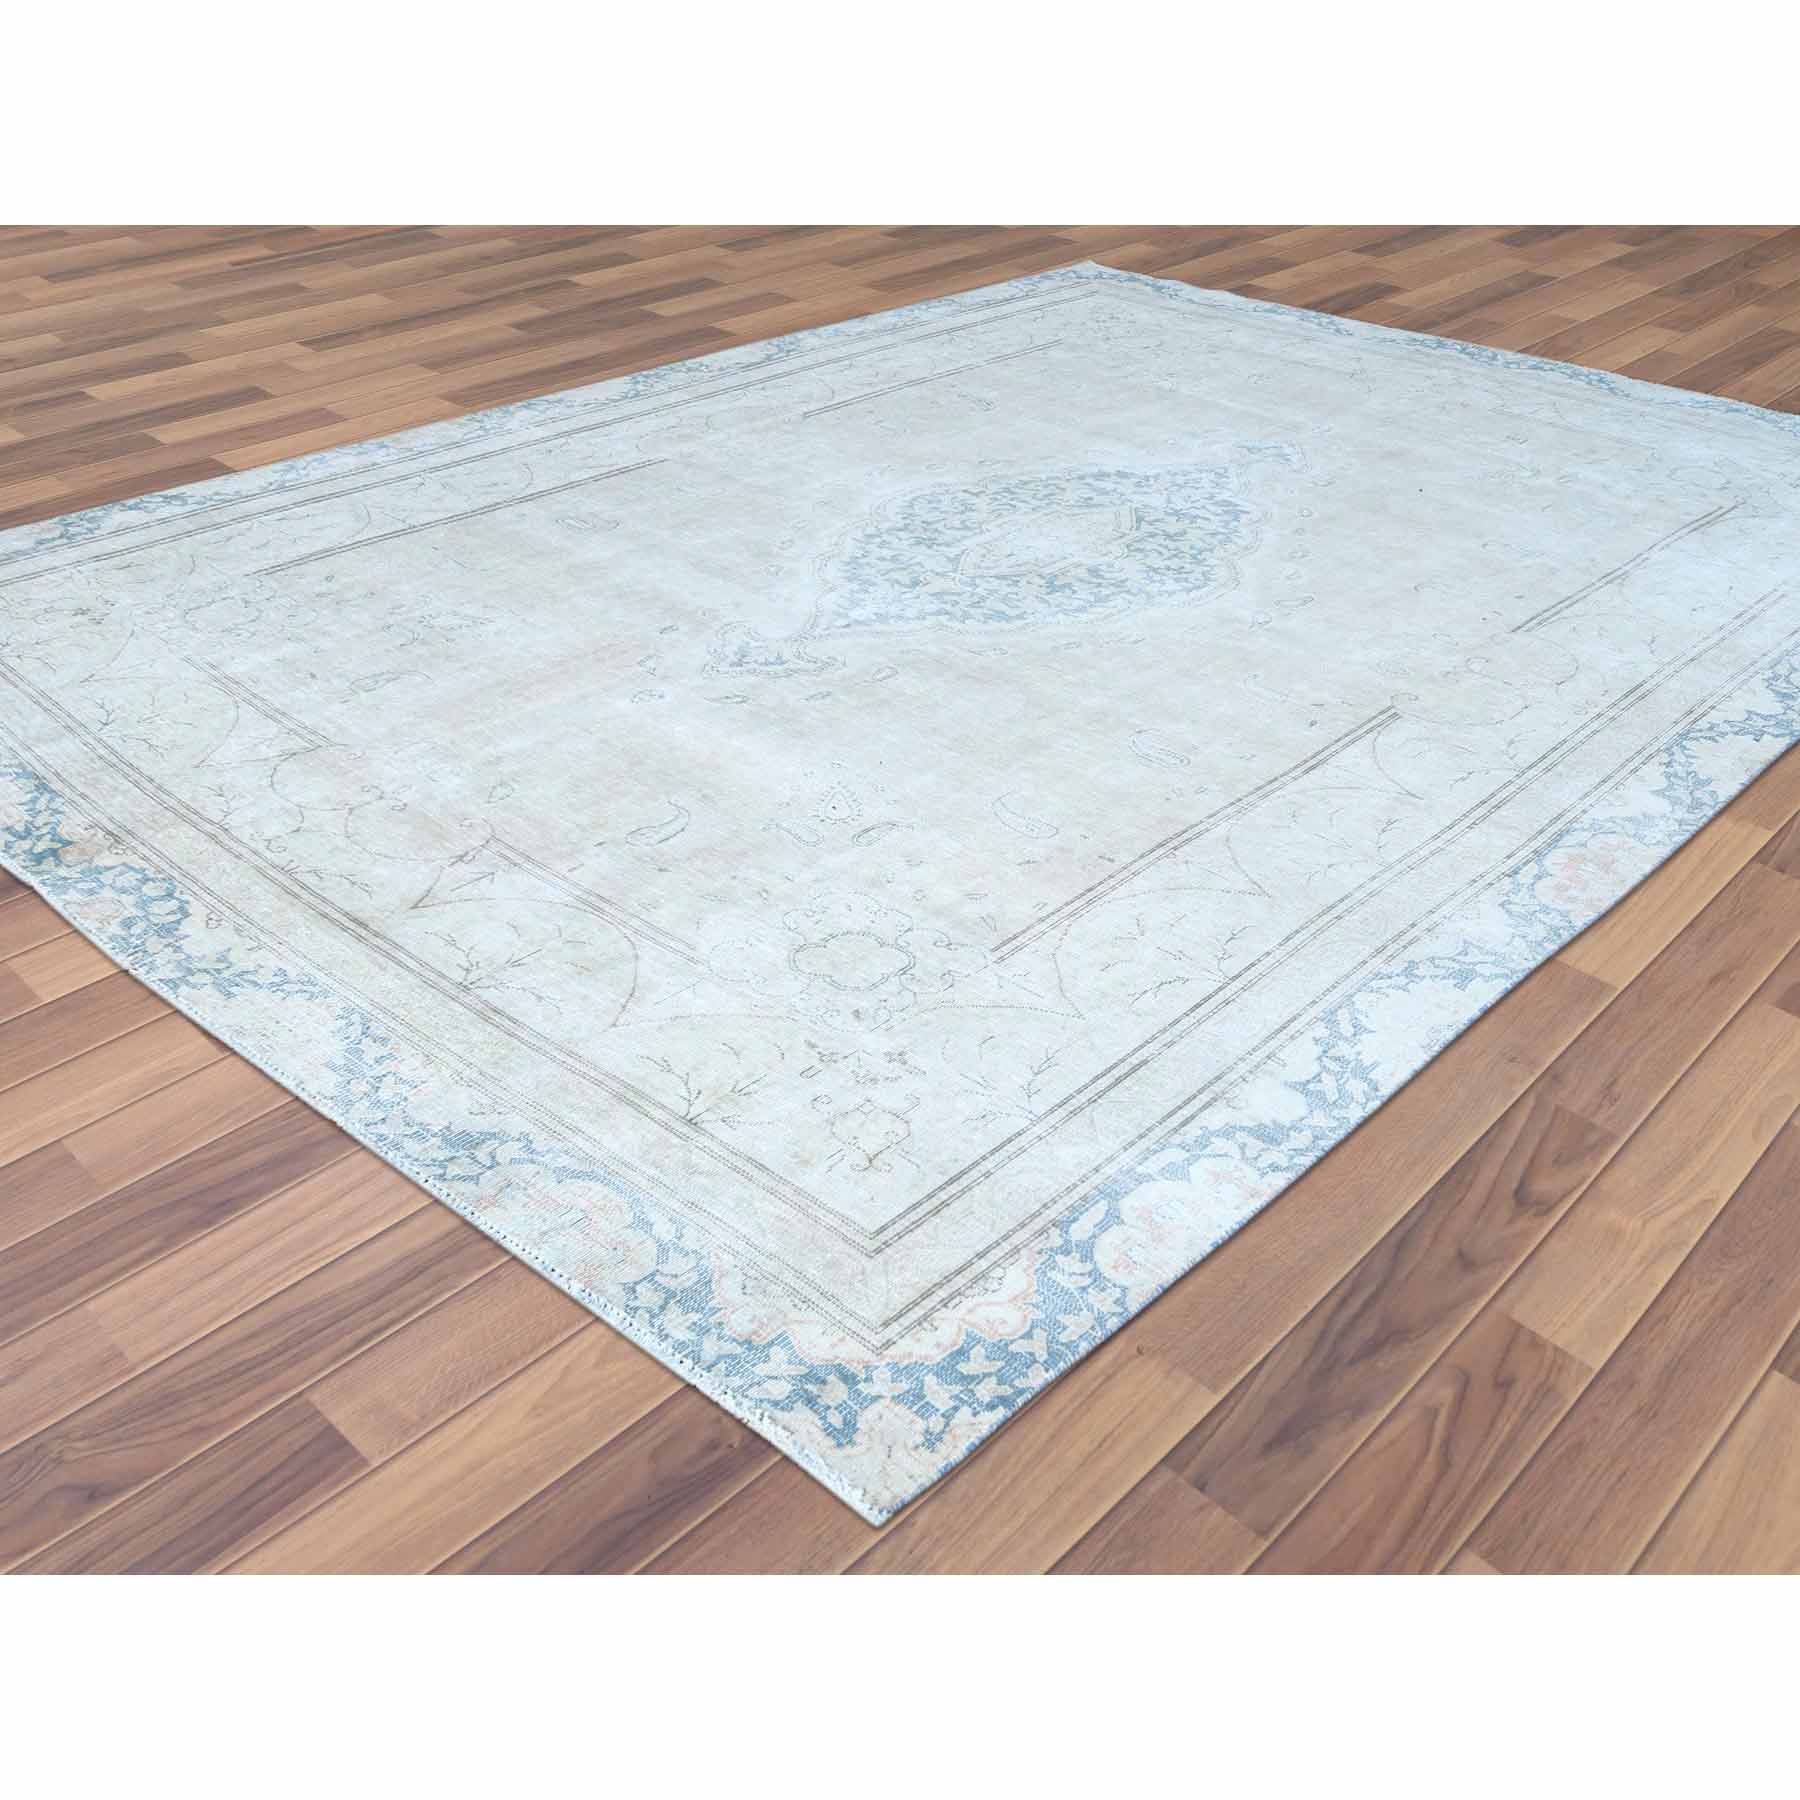 Overdyed-Vintage-Hand-Knotted-Rug-308540